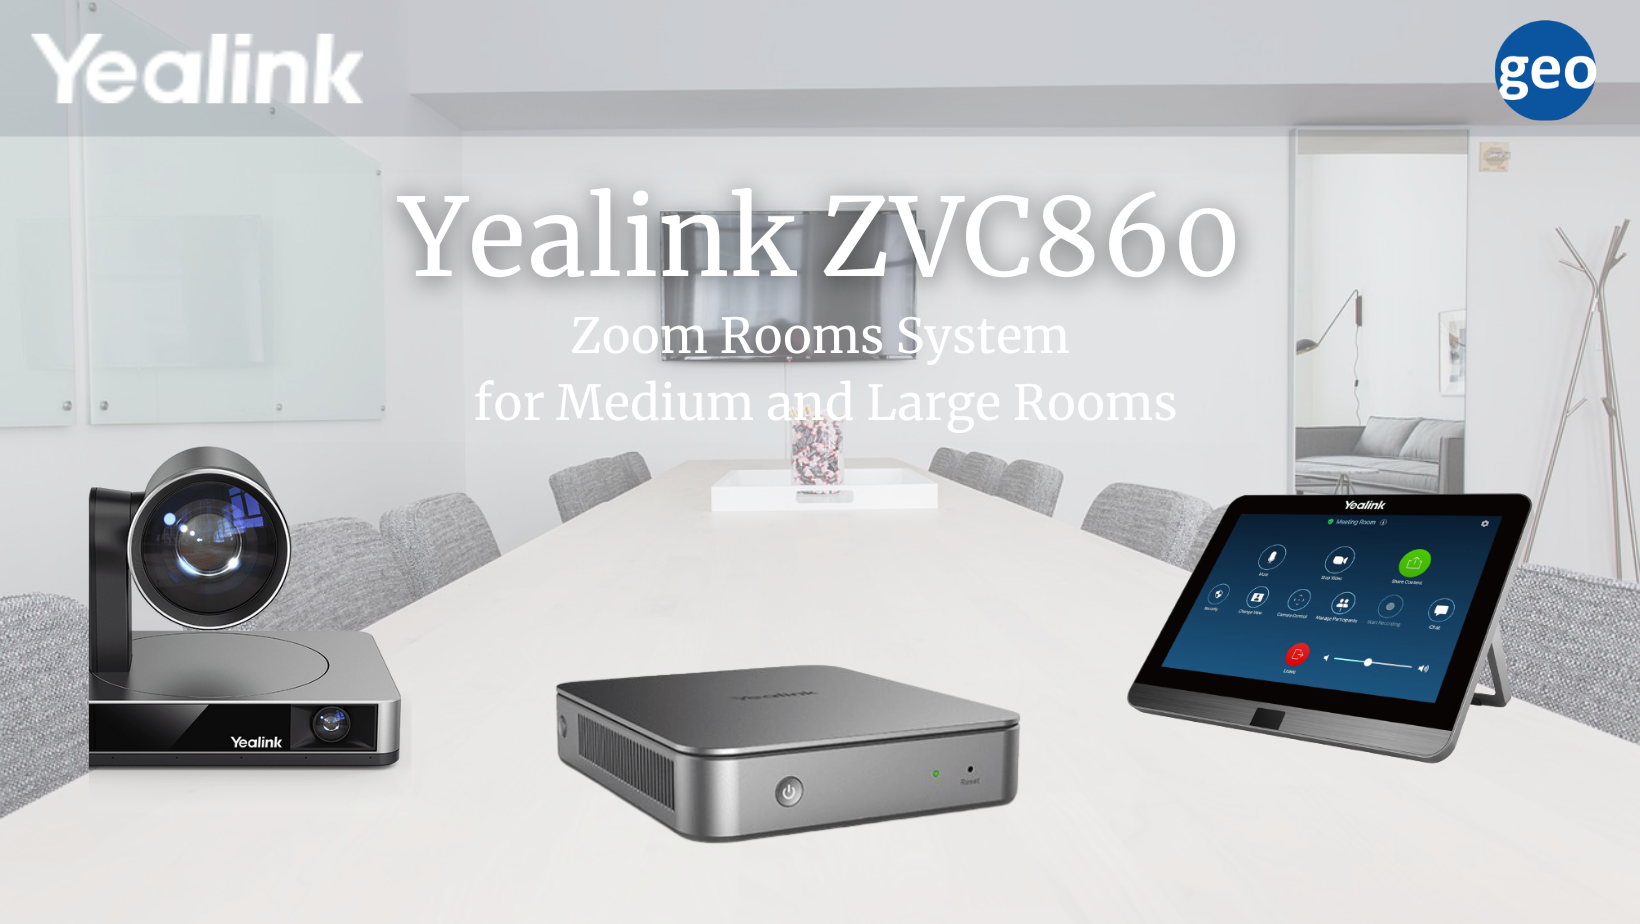 Yealink: ZVC860| Zoom Rooms System for Medium and Large Rooms